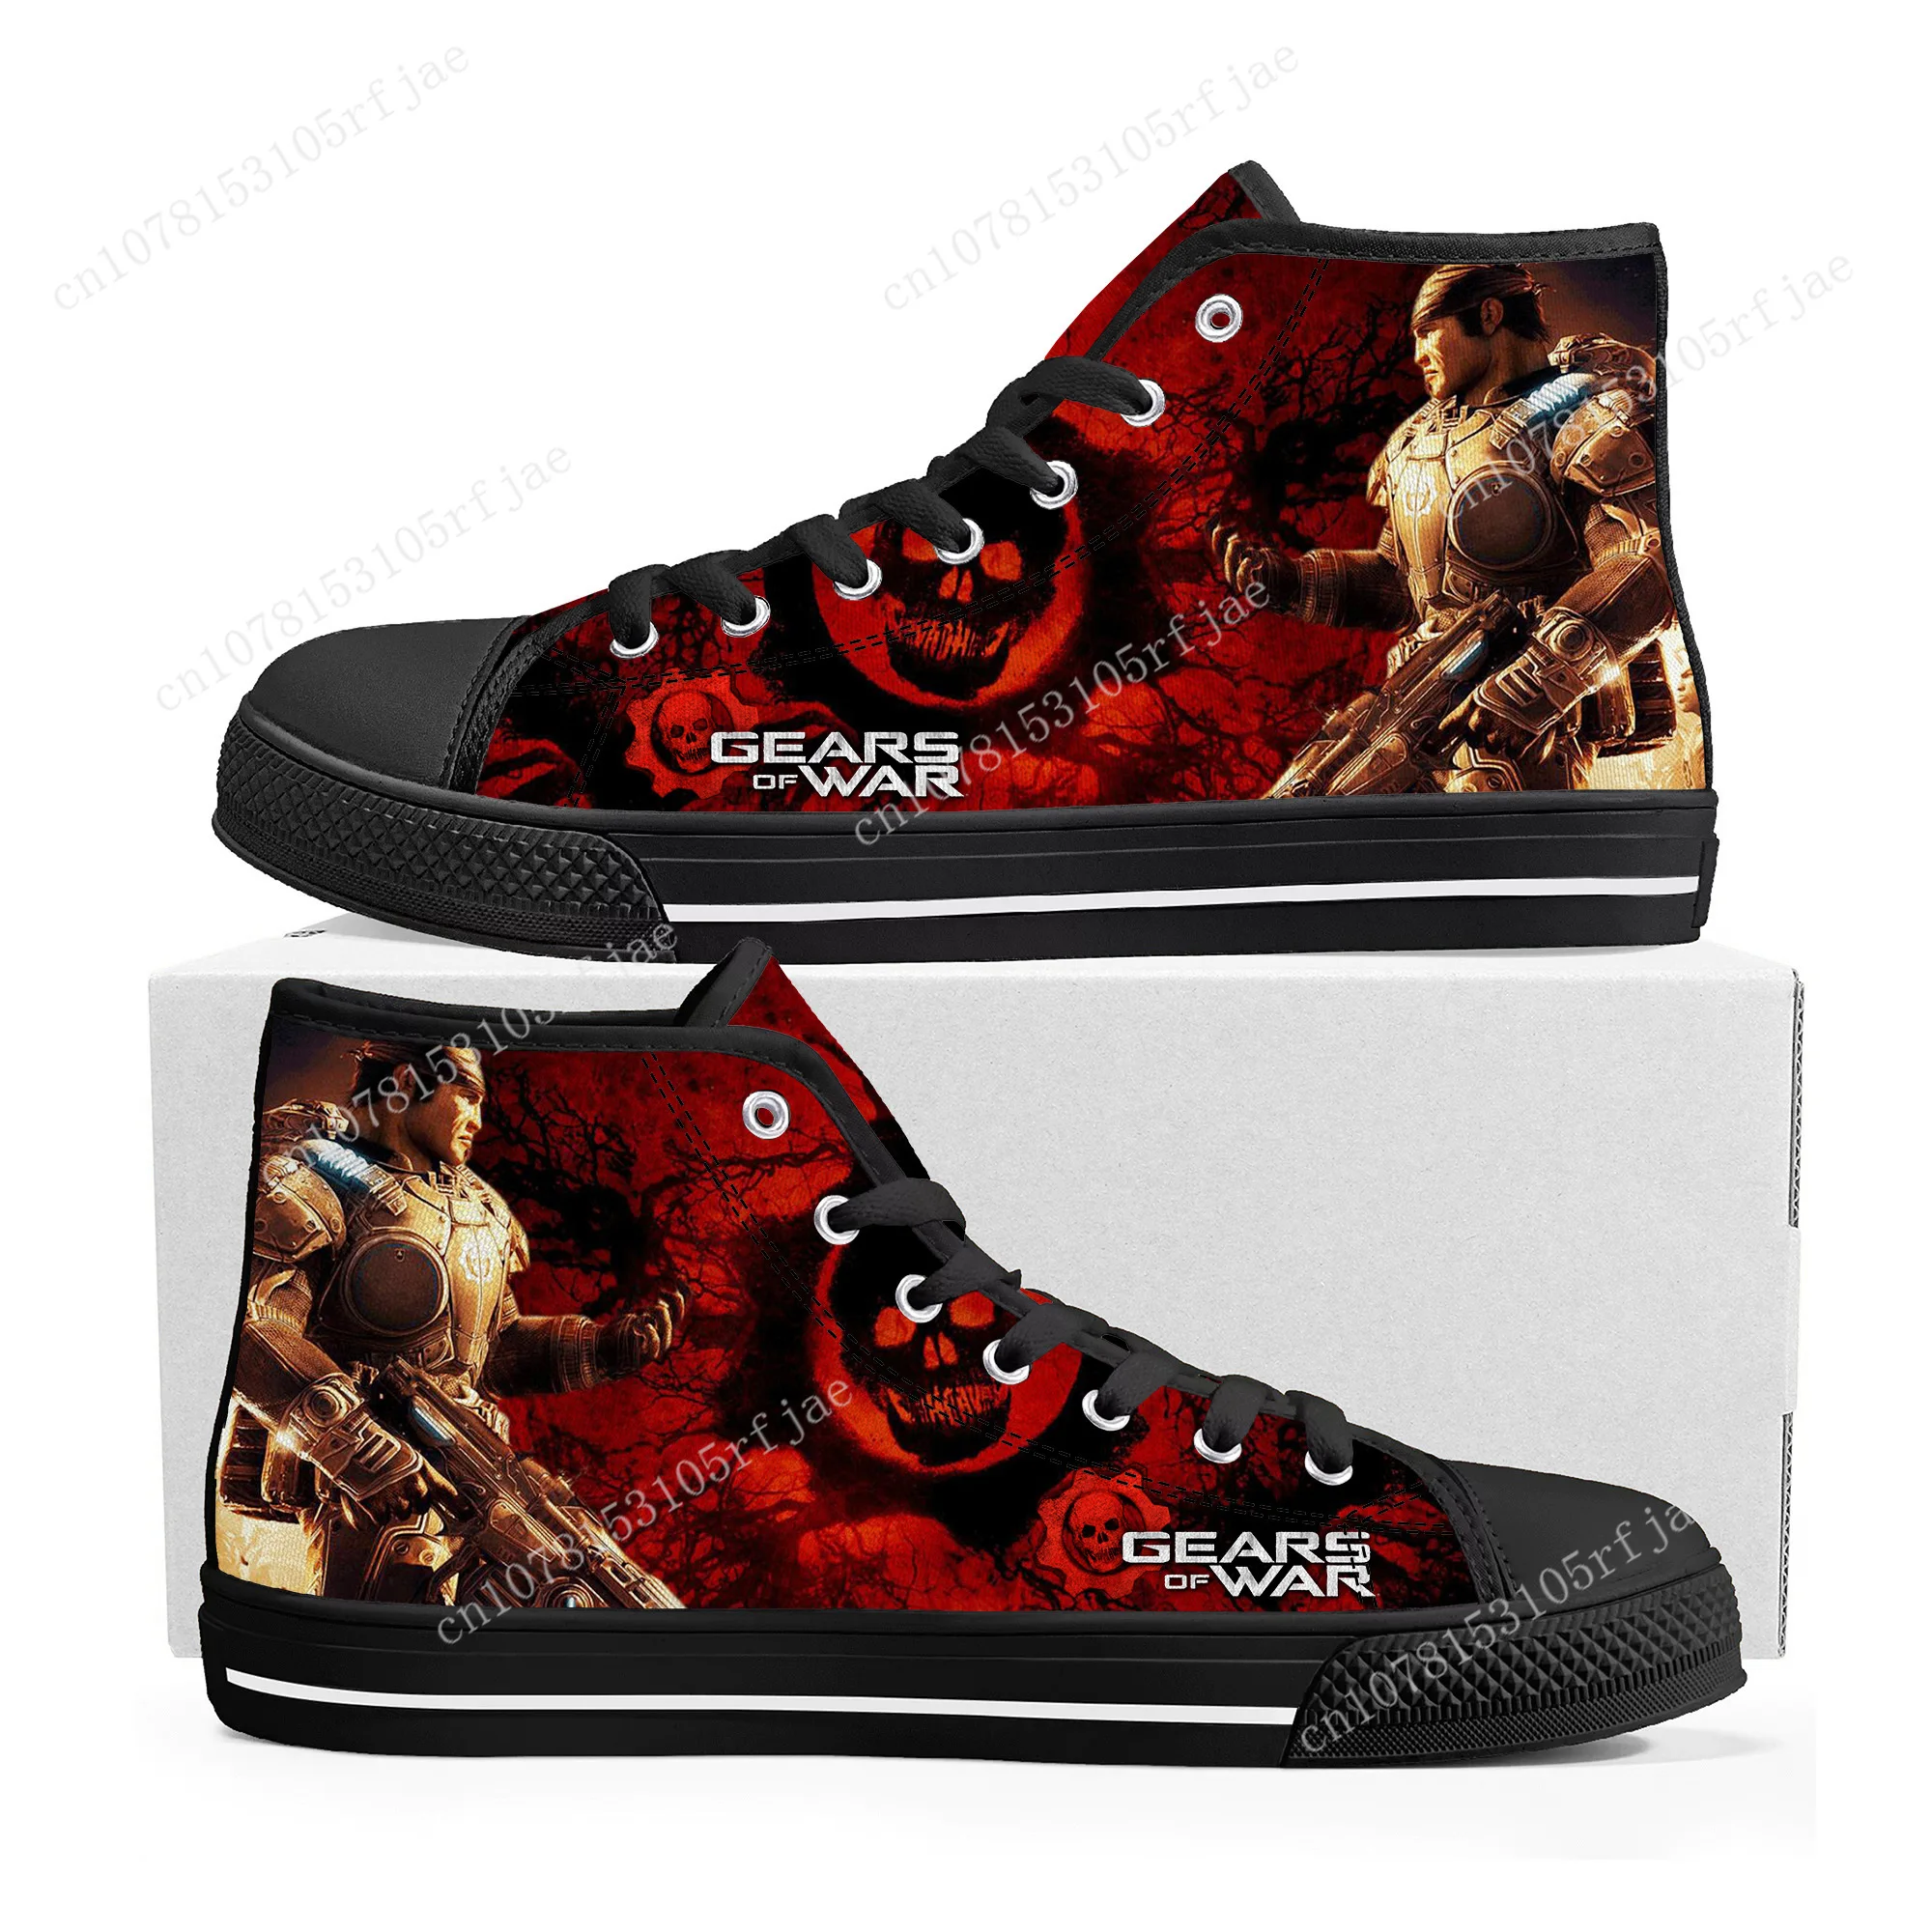 

Gears of War High Top Sneakers Cartoon Game Mens Womens Teenager High Quality Canvas Sneaker Fashion Custom Built Couple Shoes